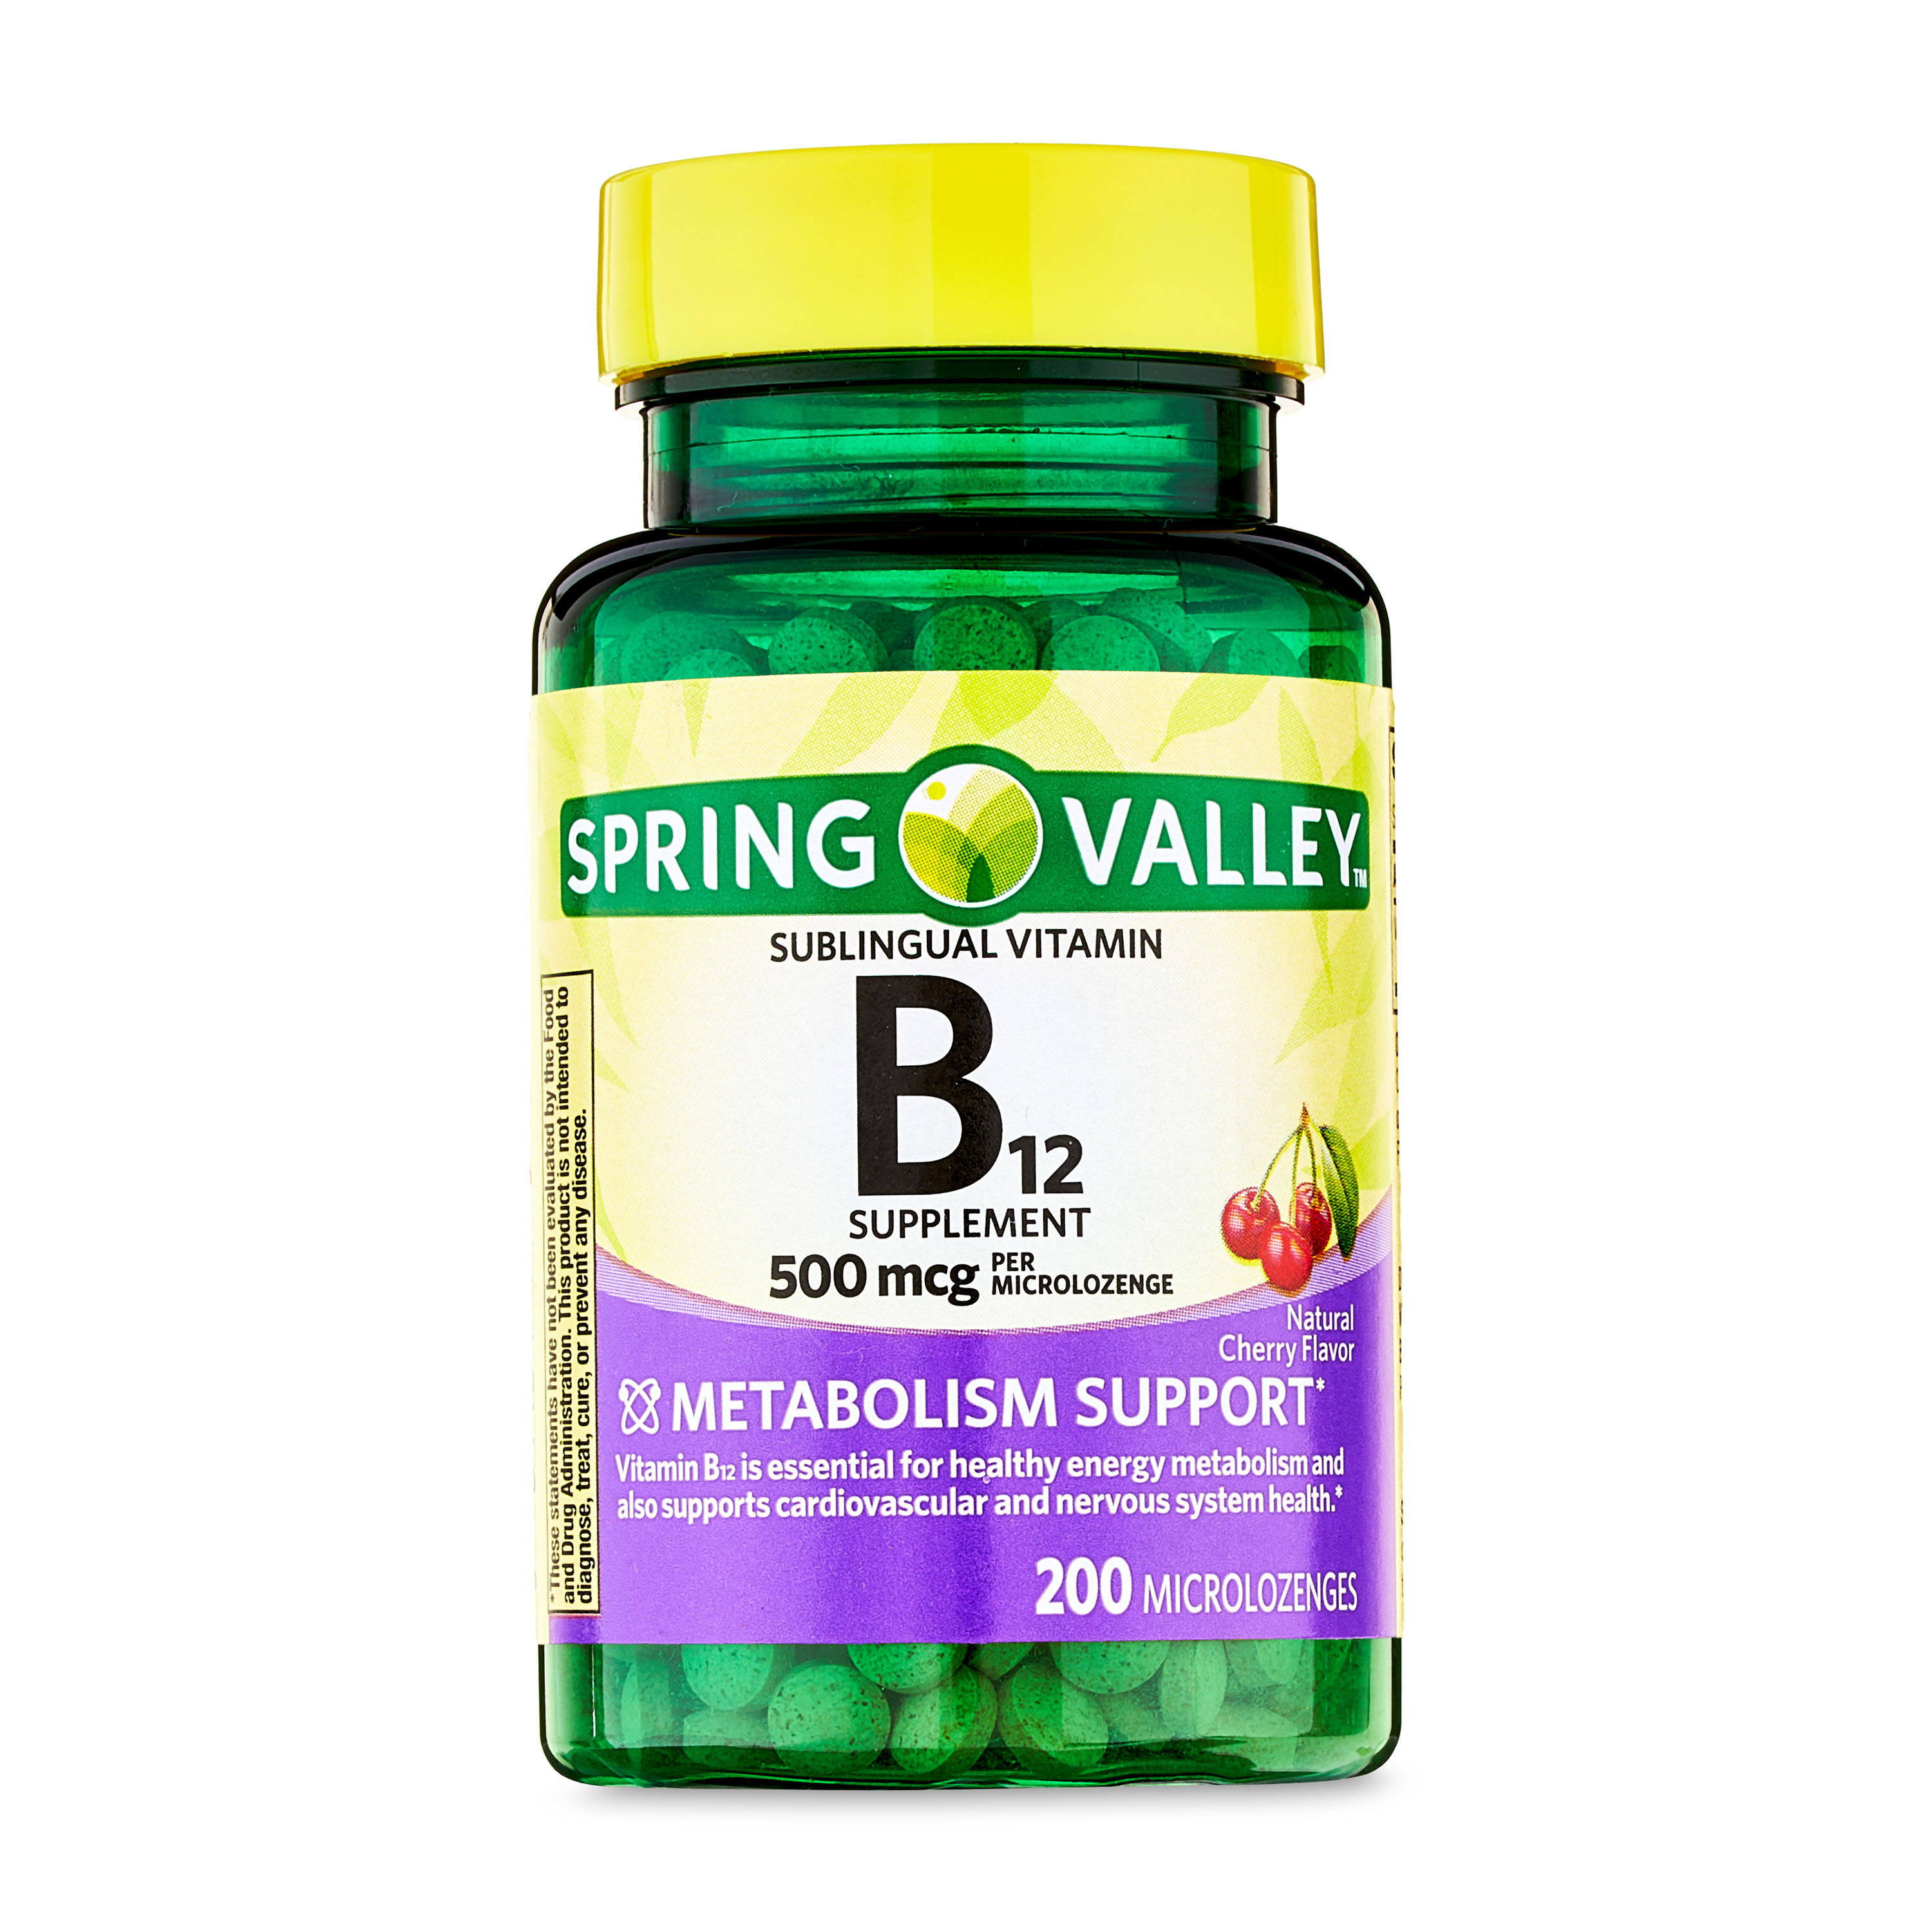 Spring Valley Sublingual Vitamin B12 Microlozenges, 500 mcg, 200 Count - image 1 of 16